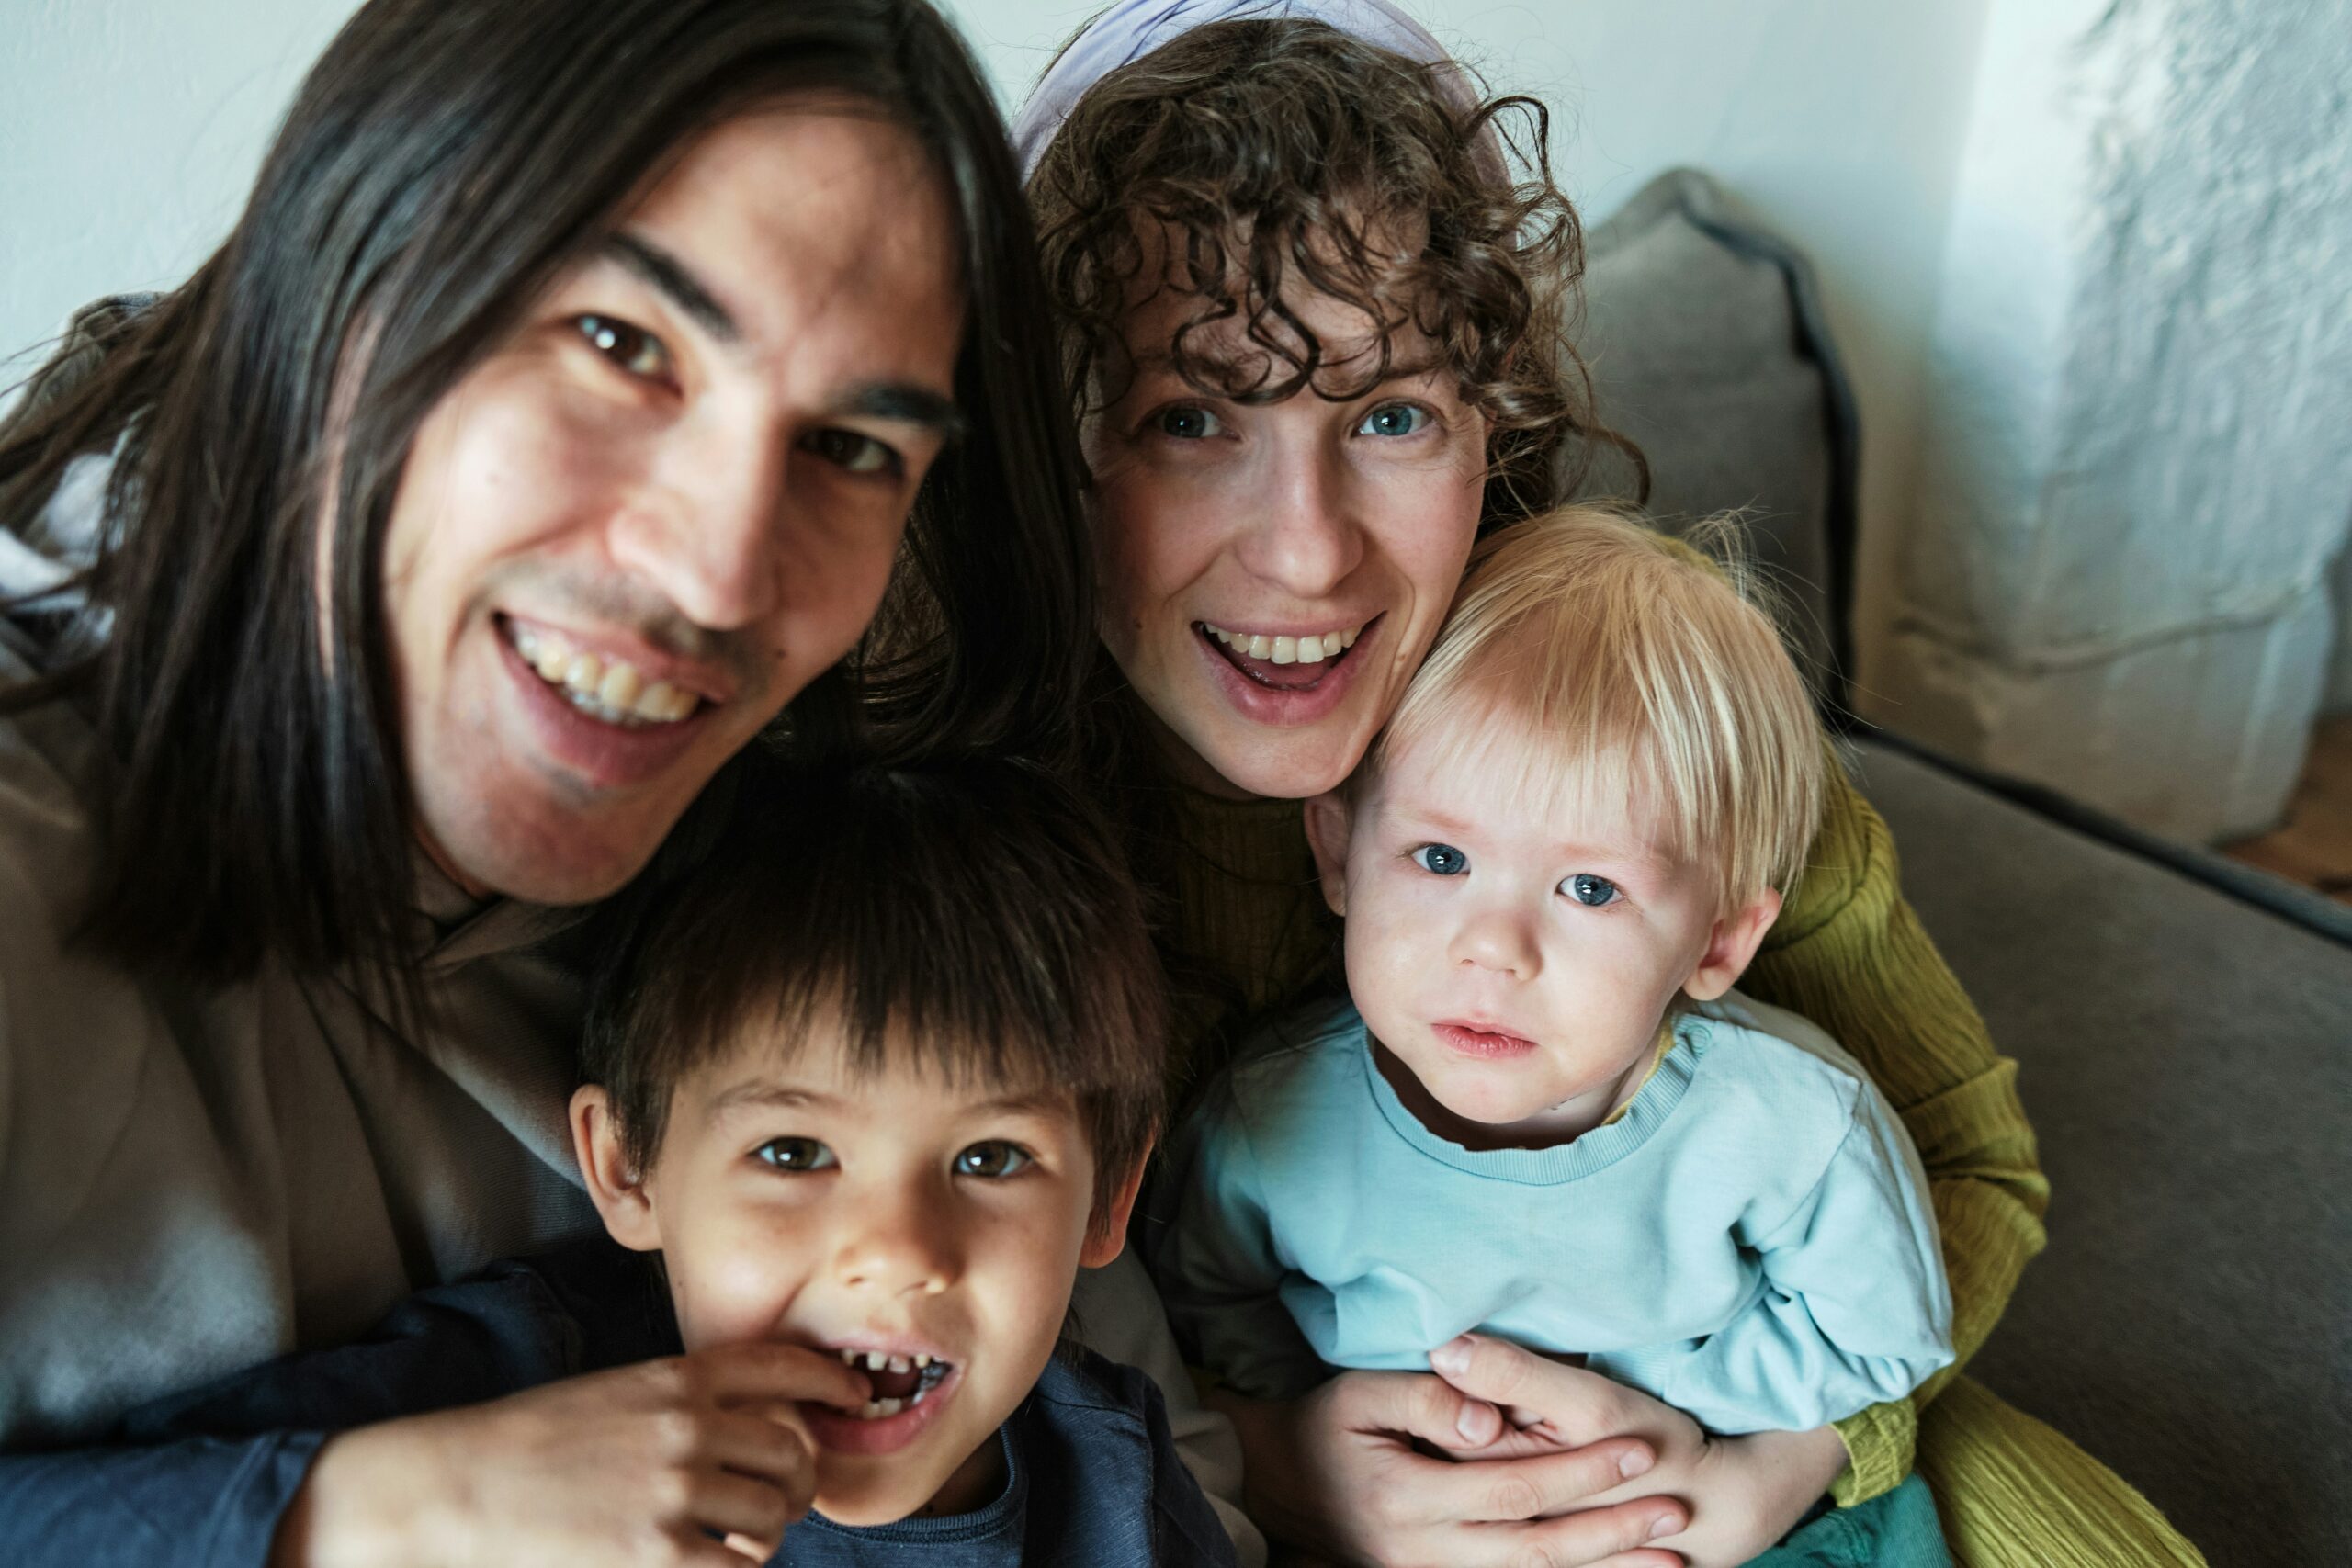 The Impact of a Healthy Marriage on Fostering and Adoption